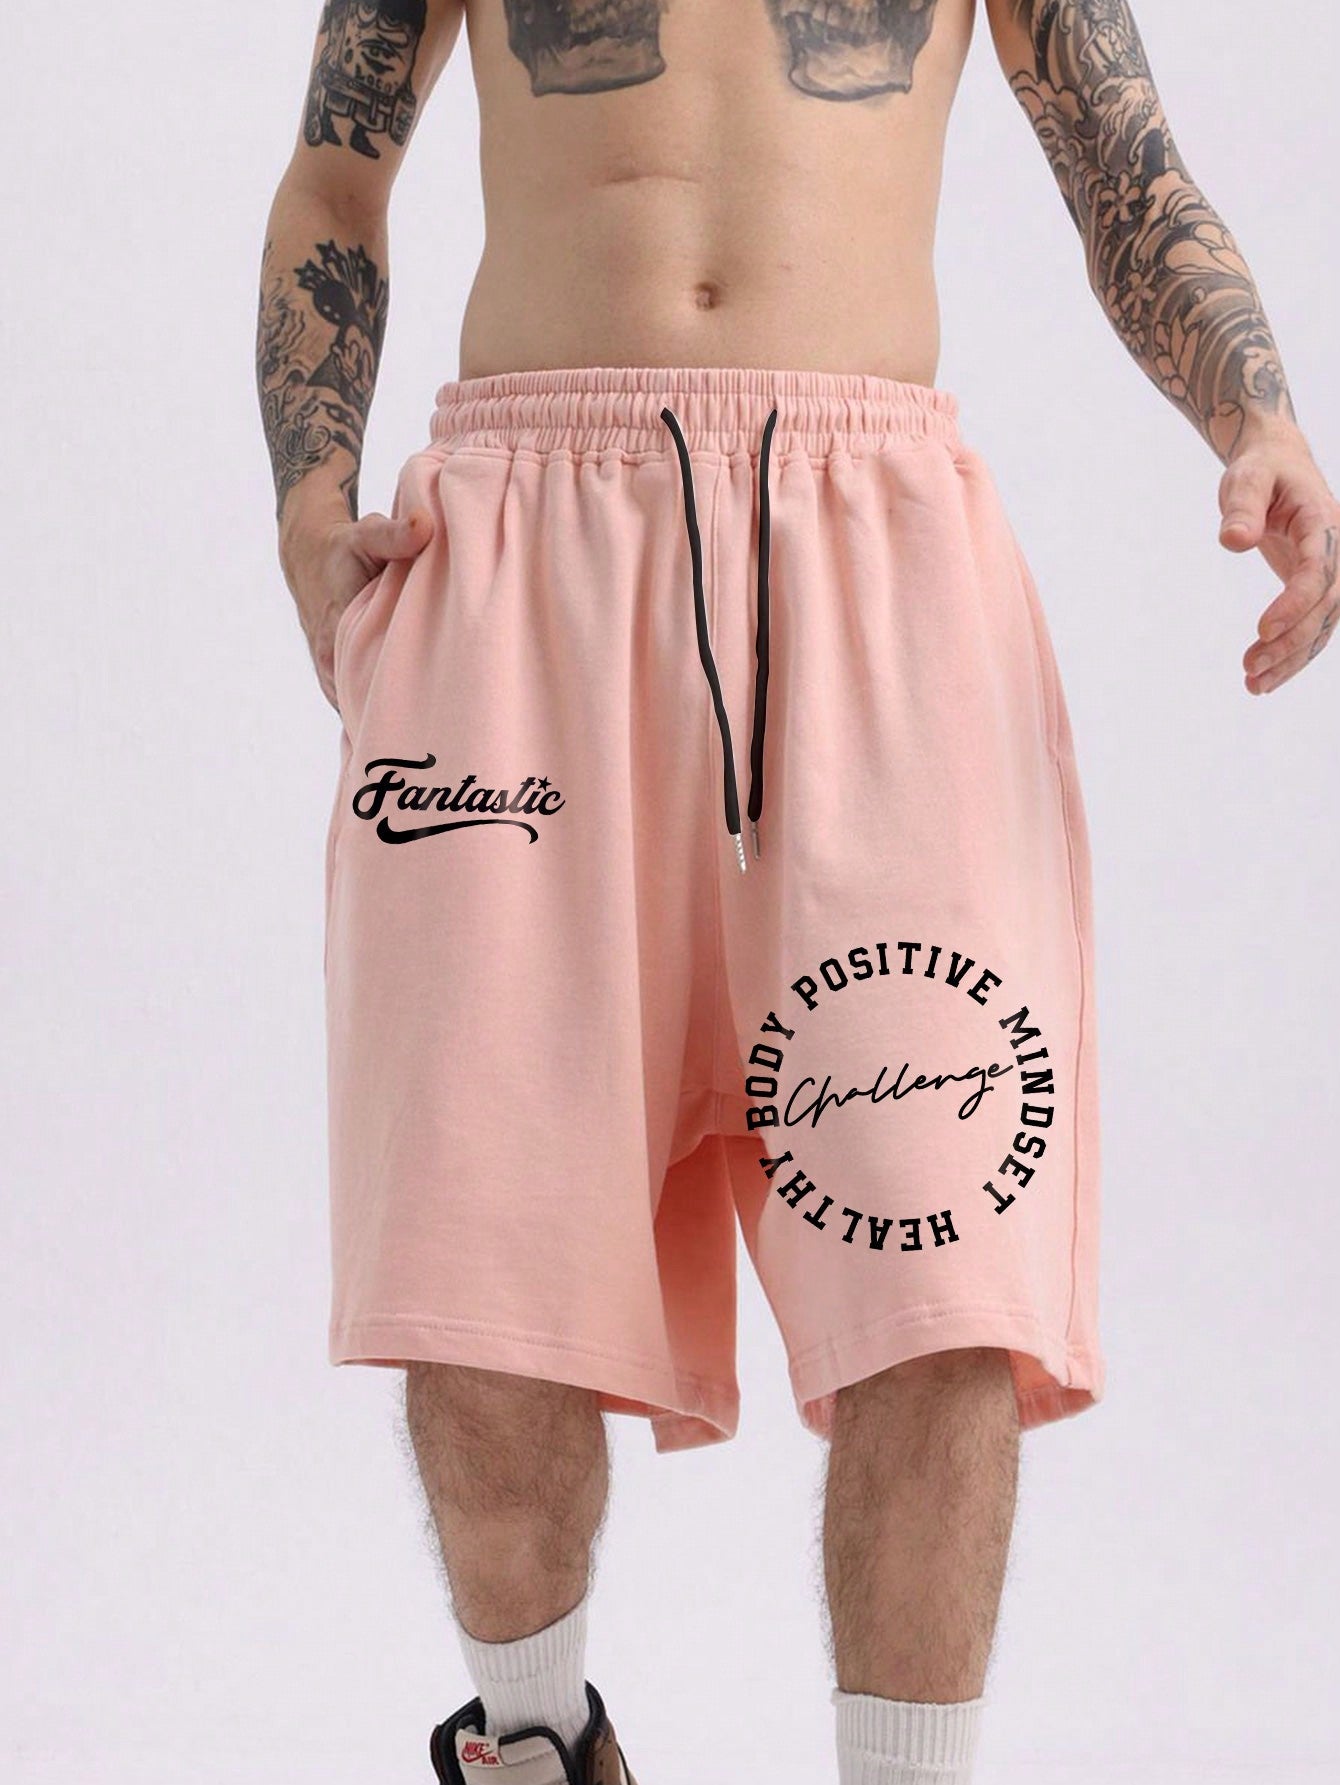 Men's Slogan Print Sports & Casual Capris Shorts, Suitable For Daily Wear In Spring And Summer